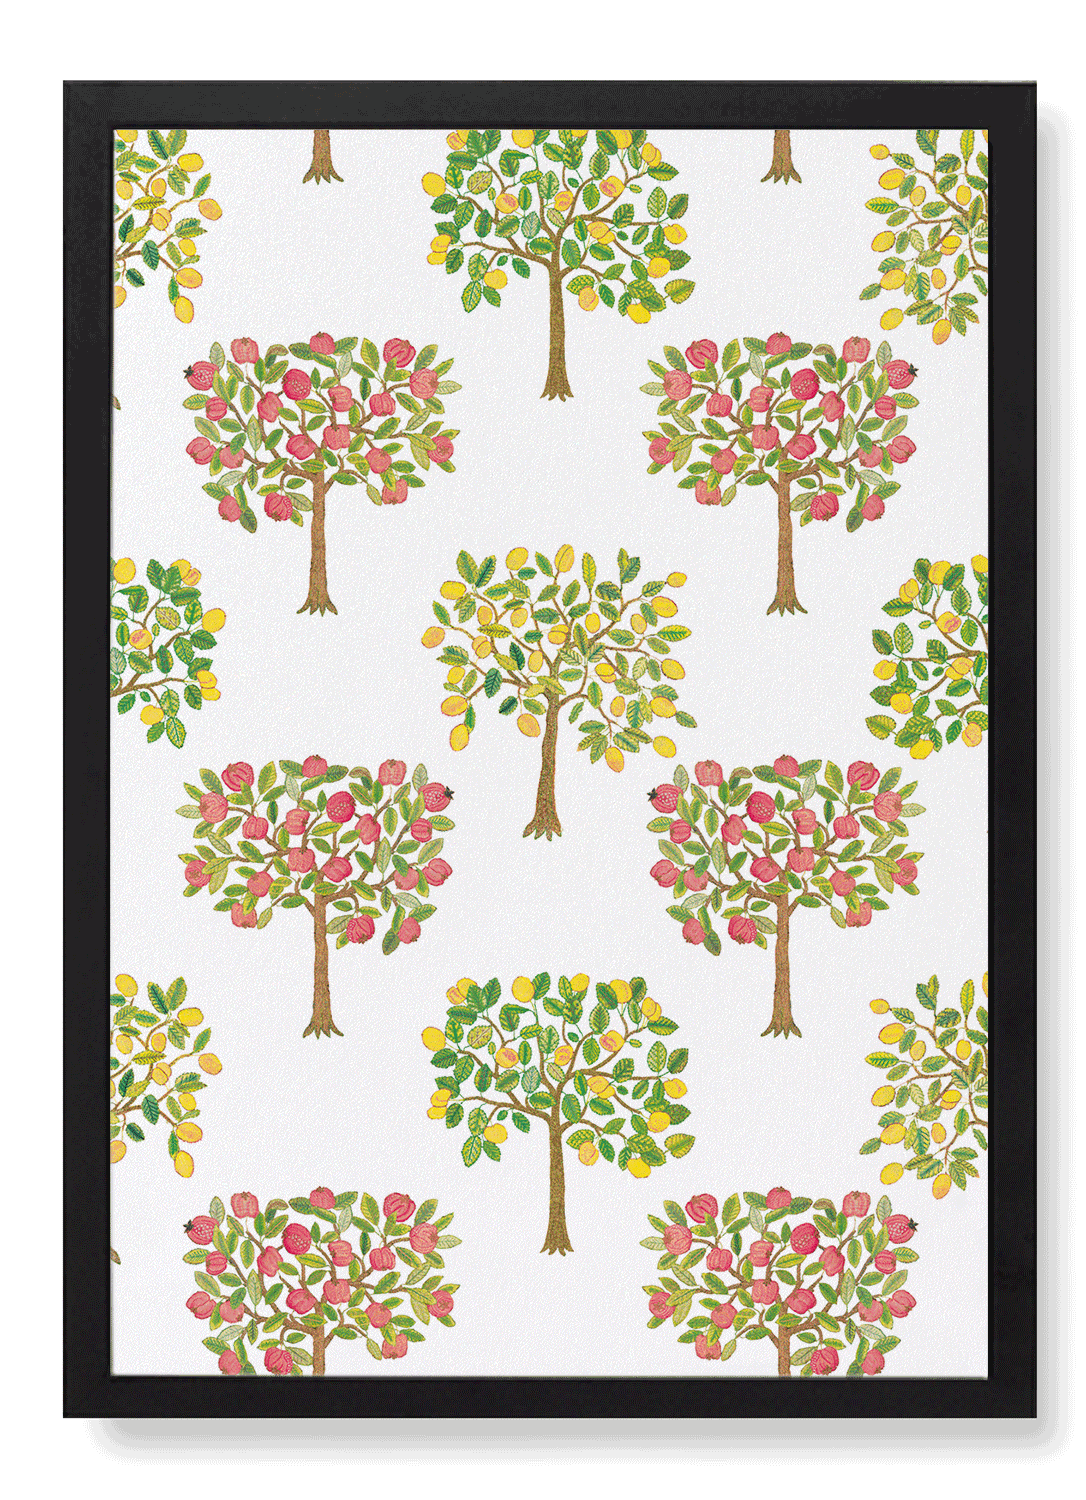 EMBROIDERY OF POMEGRANATE AND LEMON TREES ON WHITE (16TH C.)